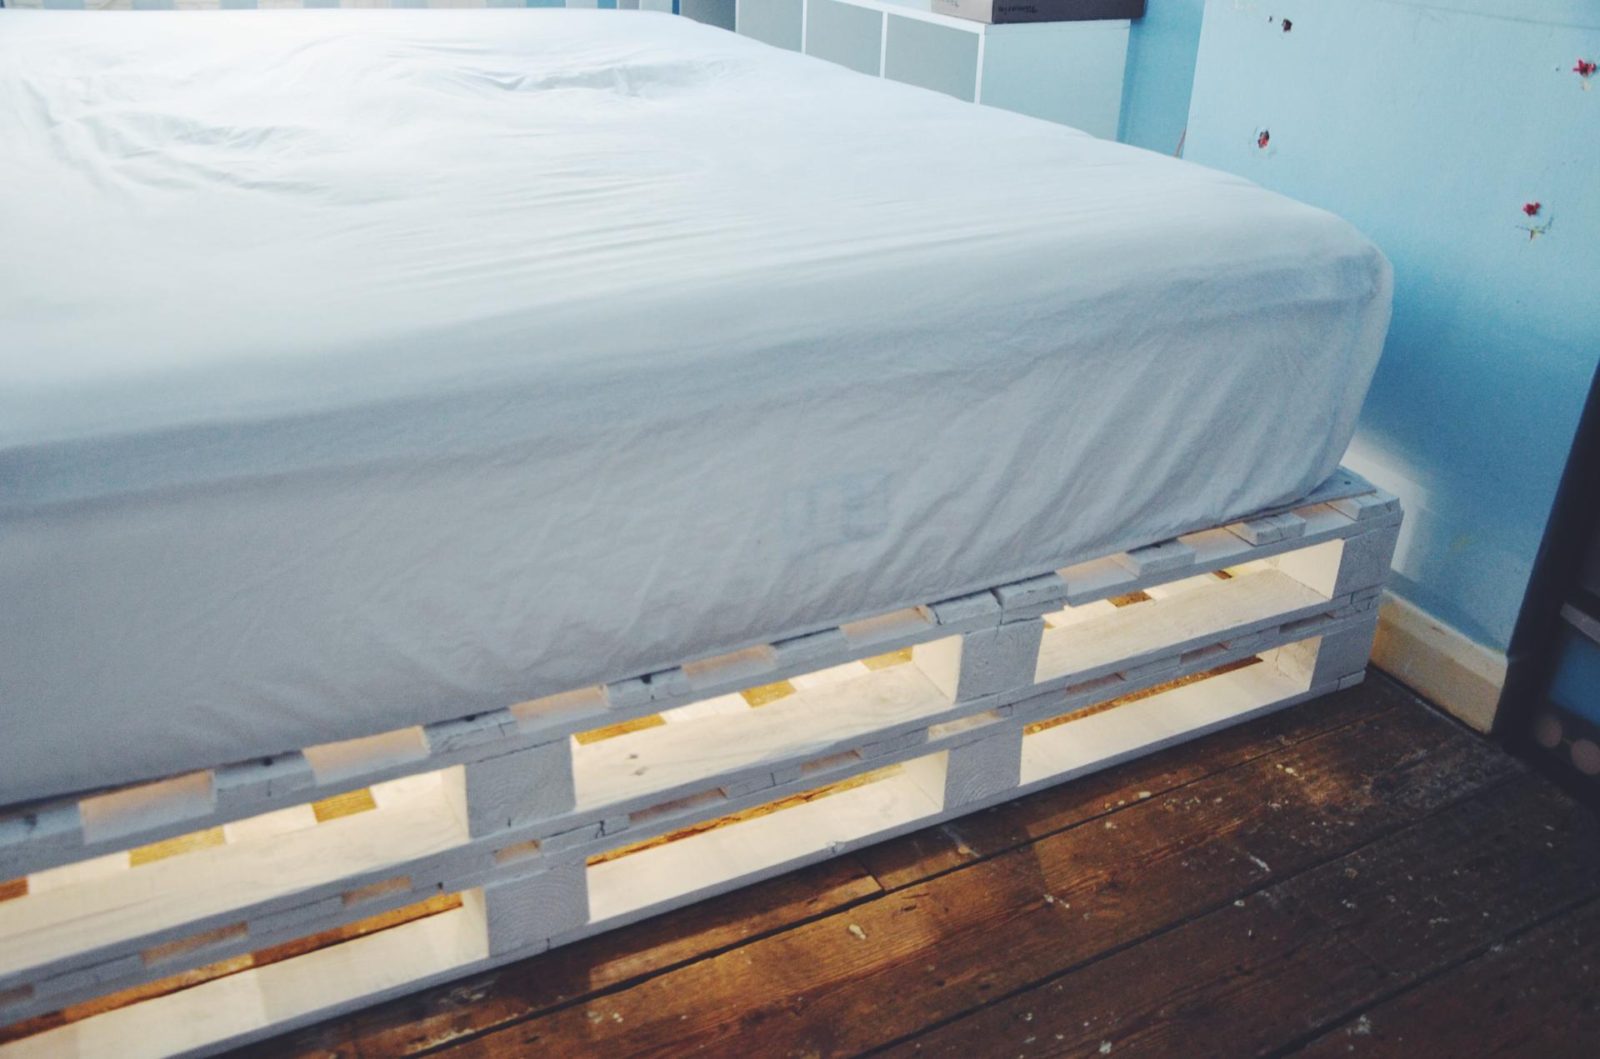 How to make a palette bed